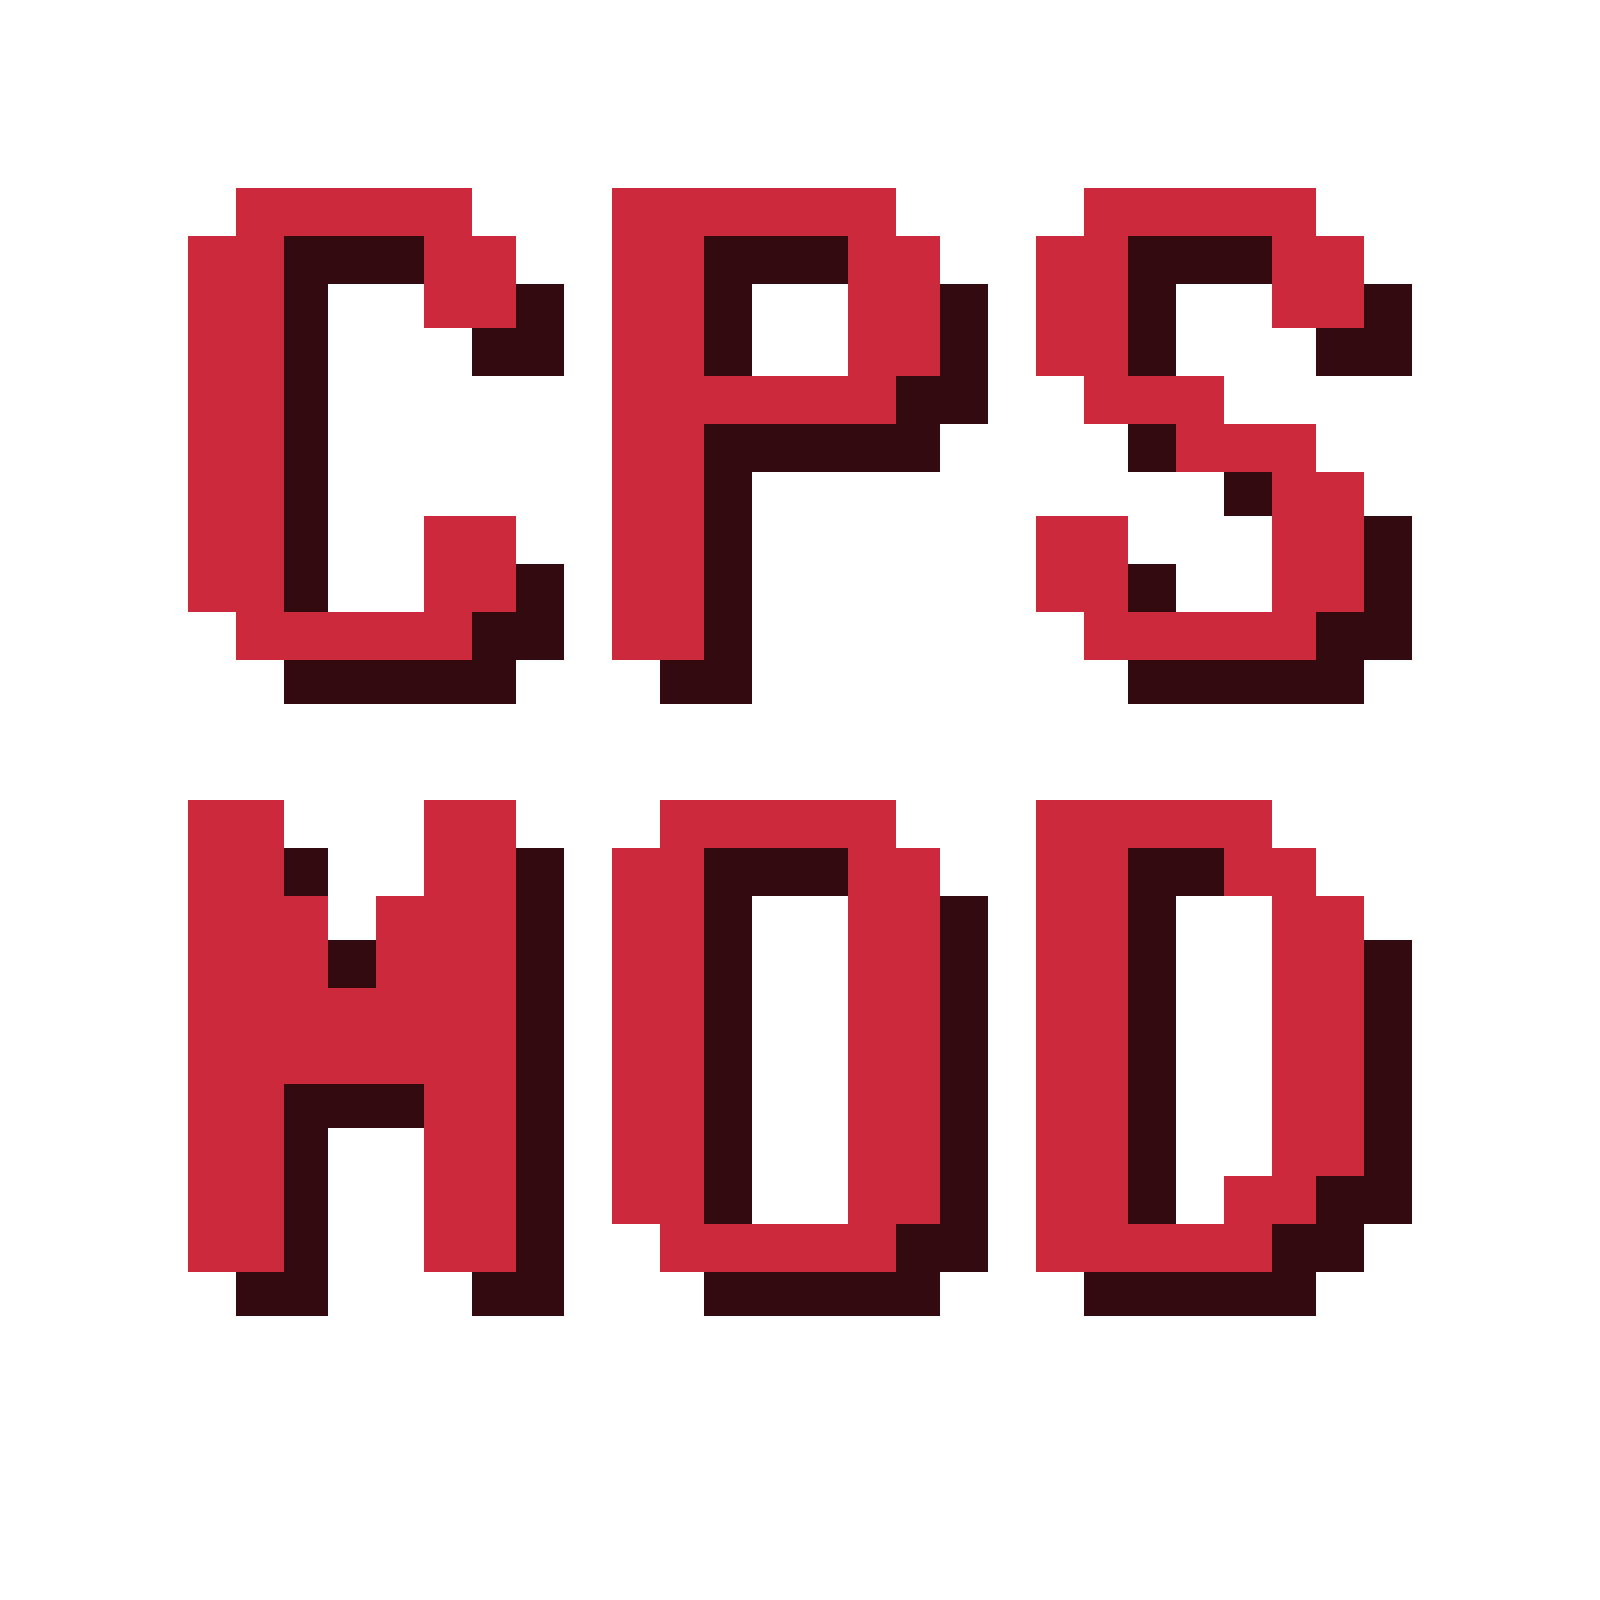 Simple CPS Mod (1.8.9) - Show LMB and RMB CPS Ingame 